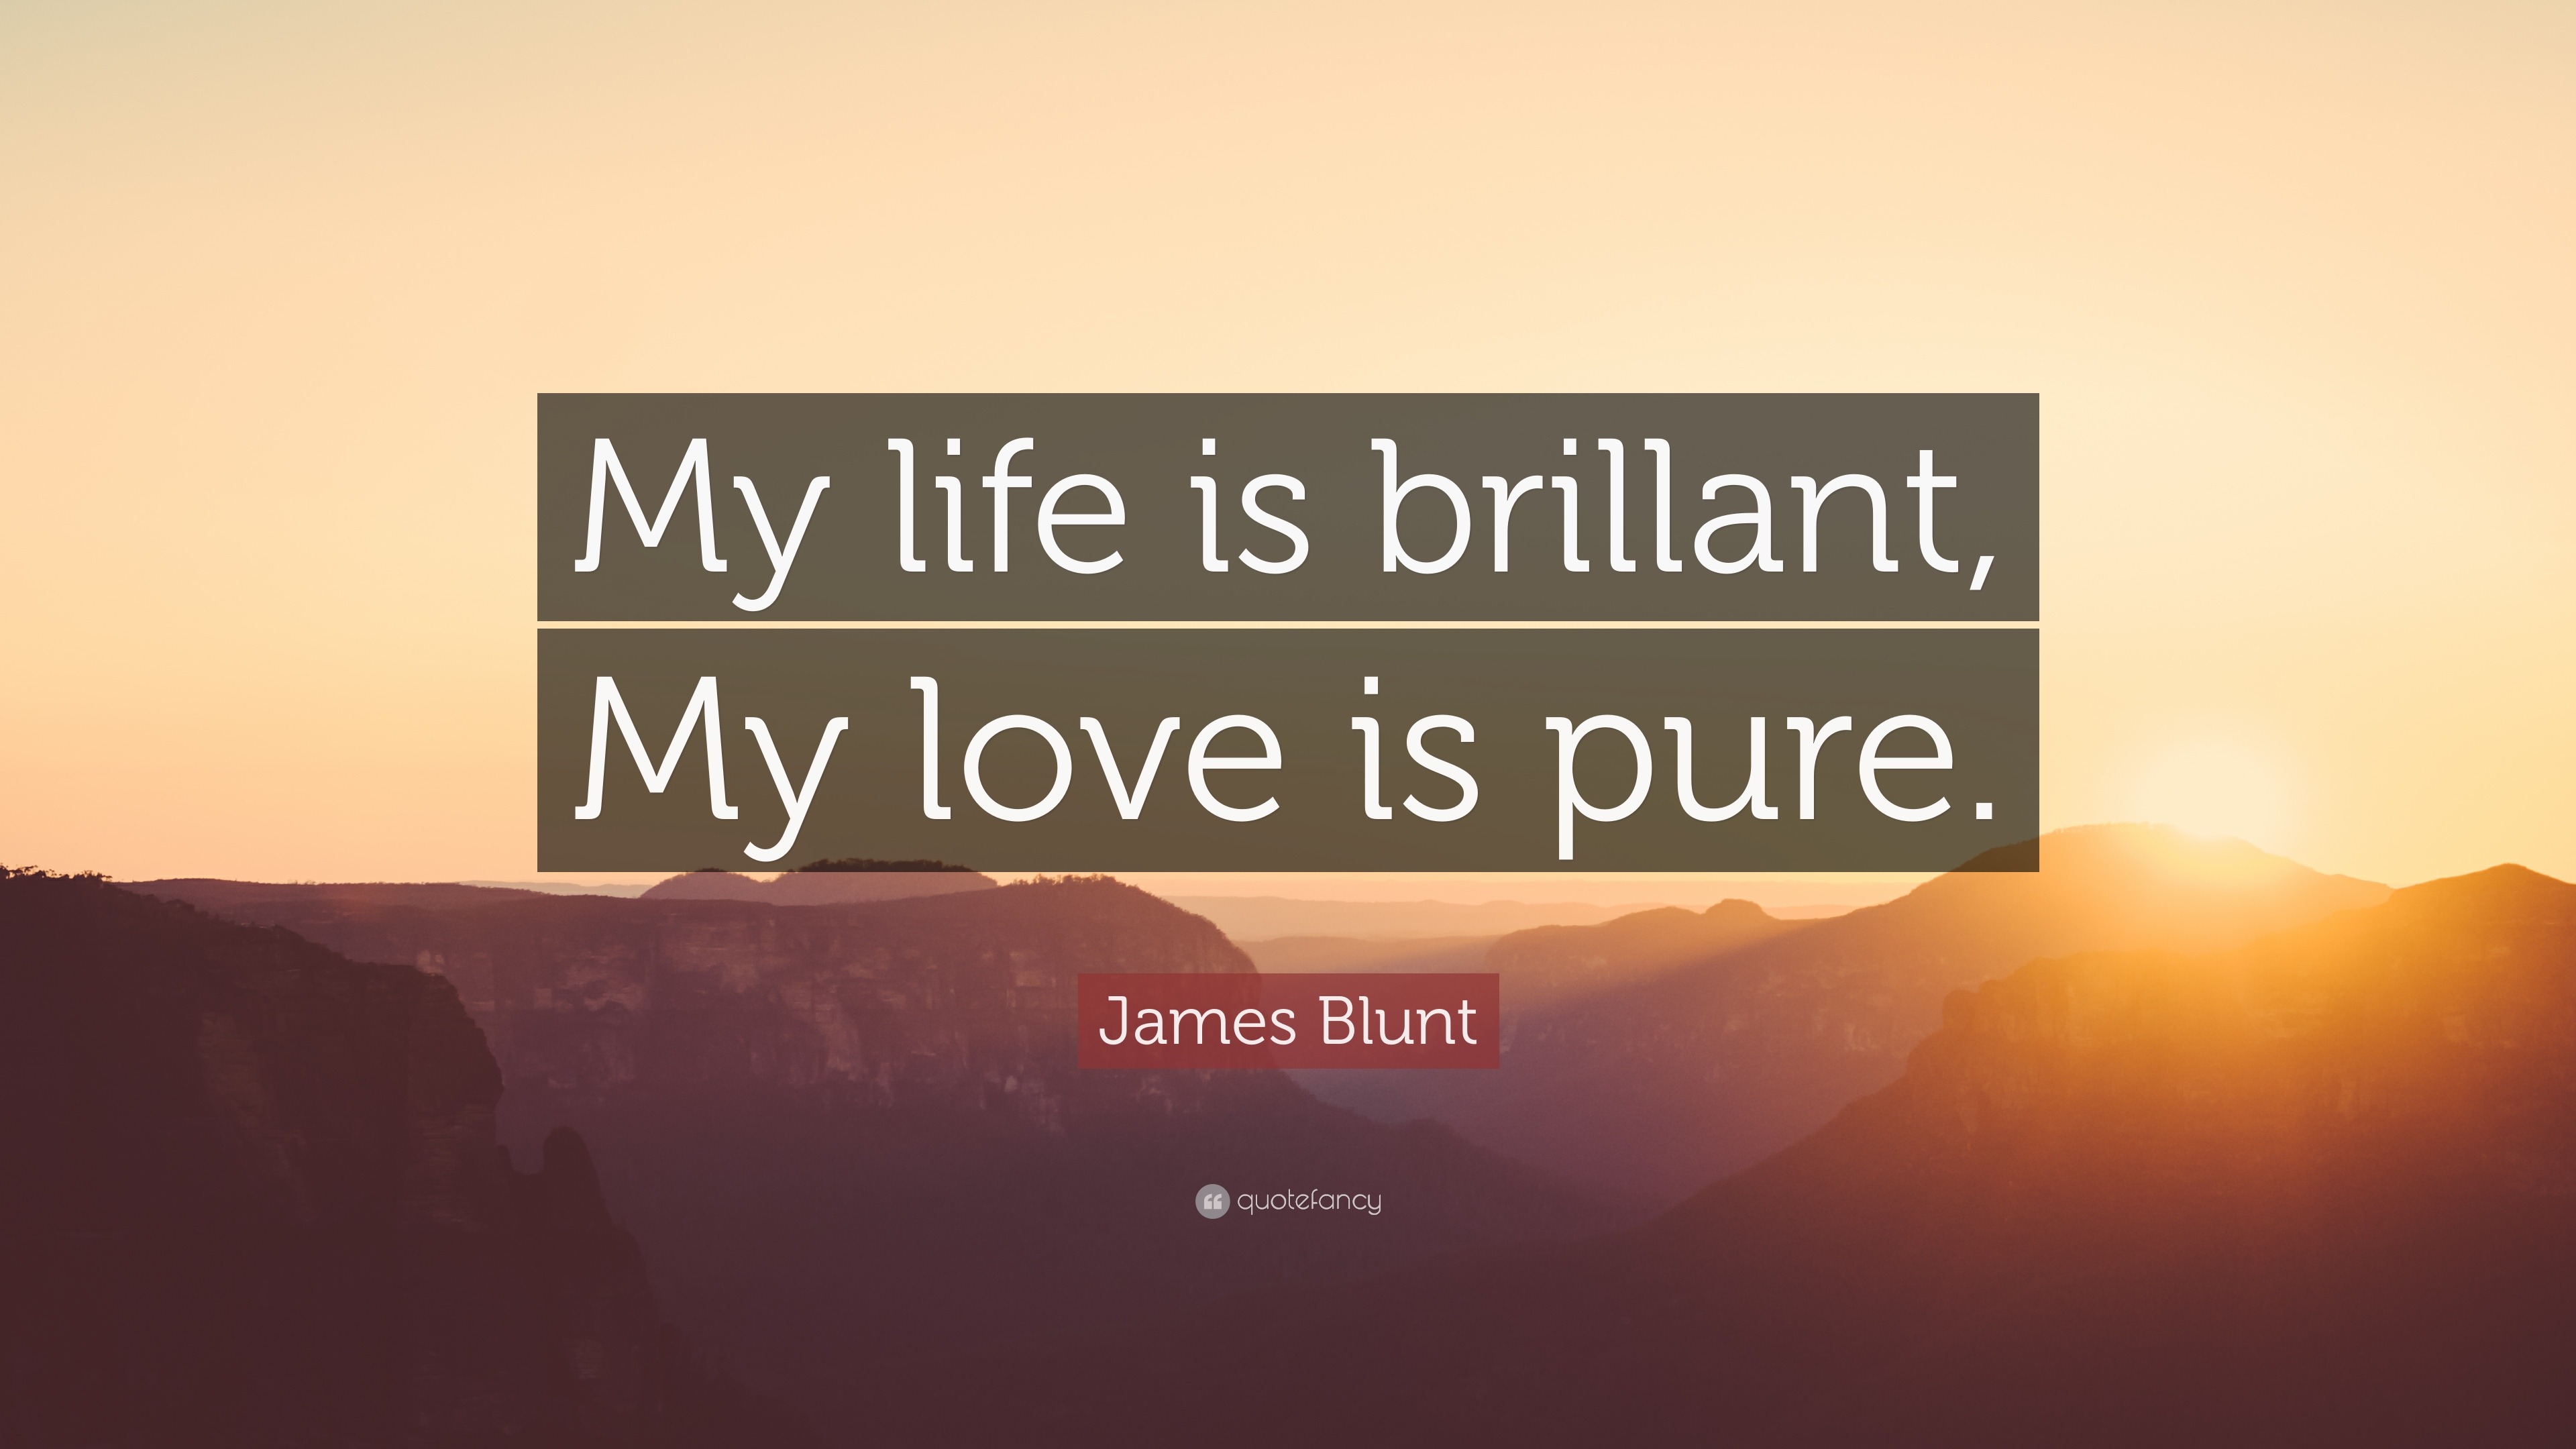 James Blunt Quote “My life is brillant My love is pure ”